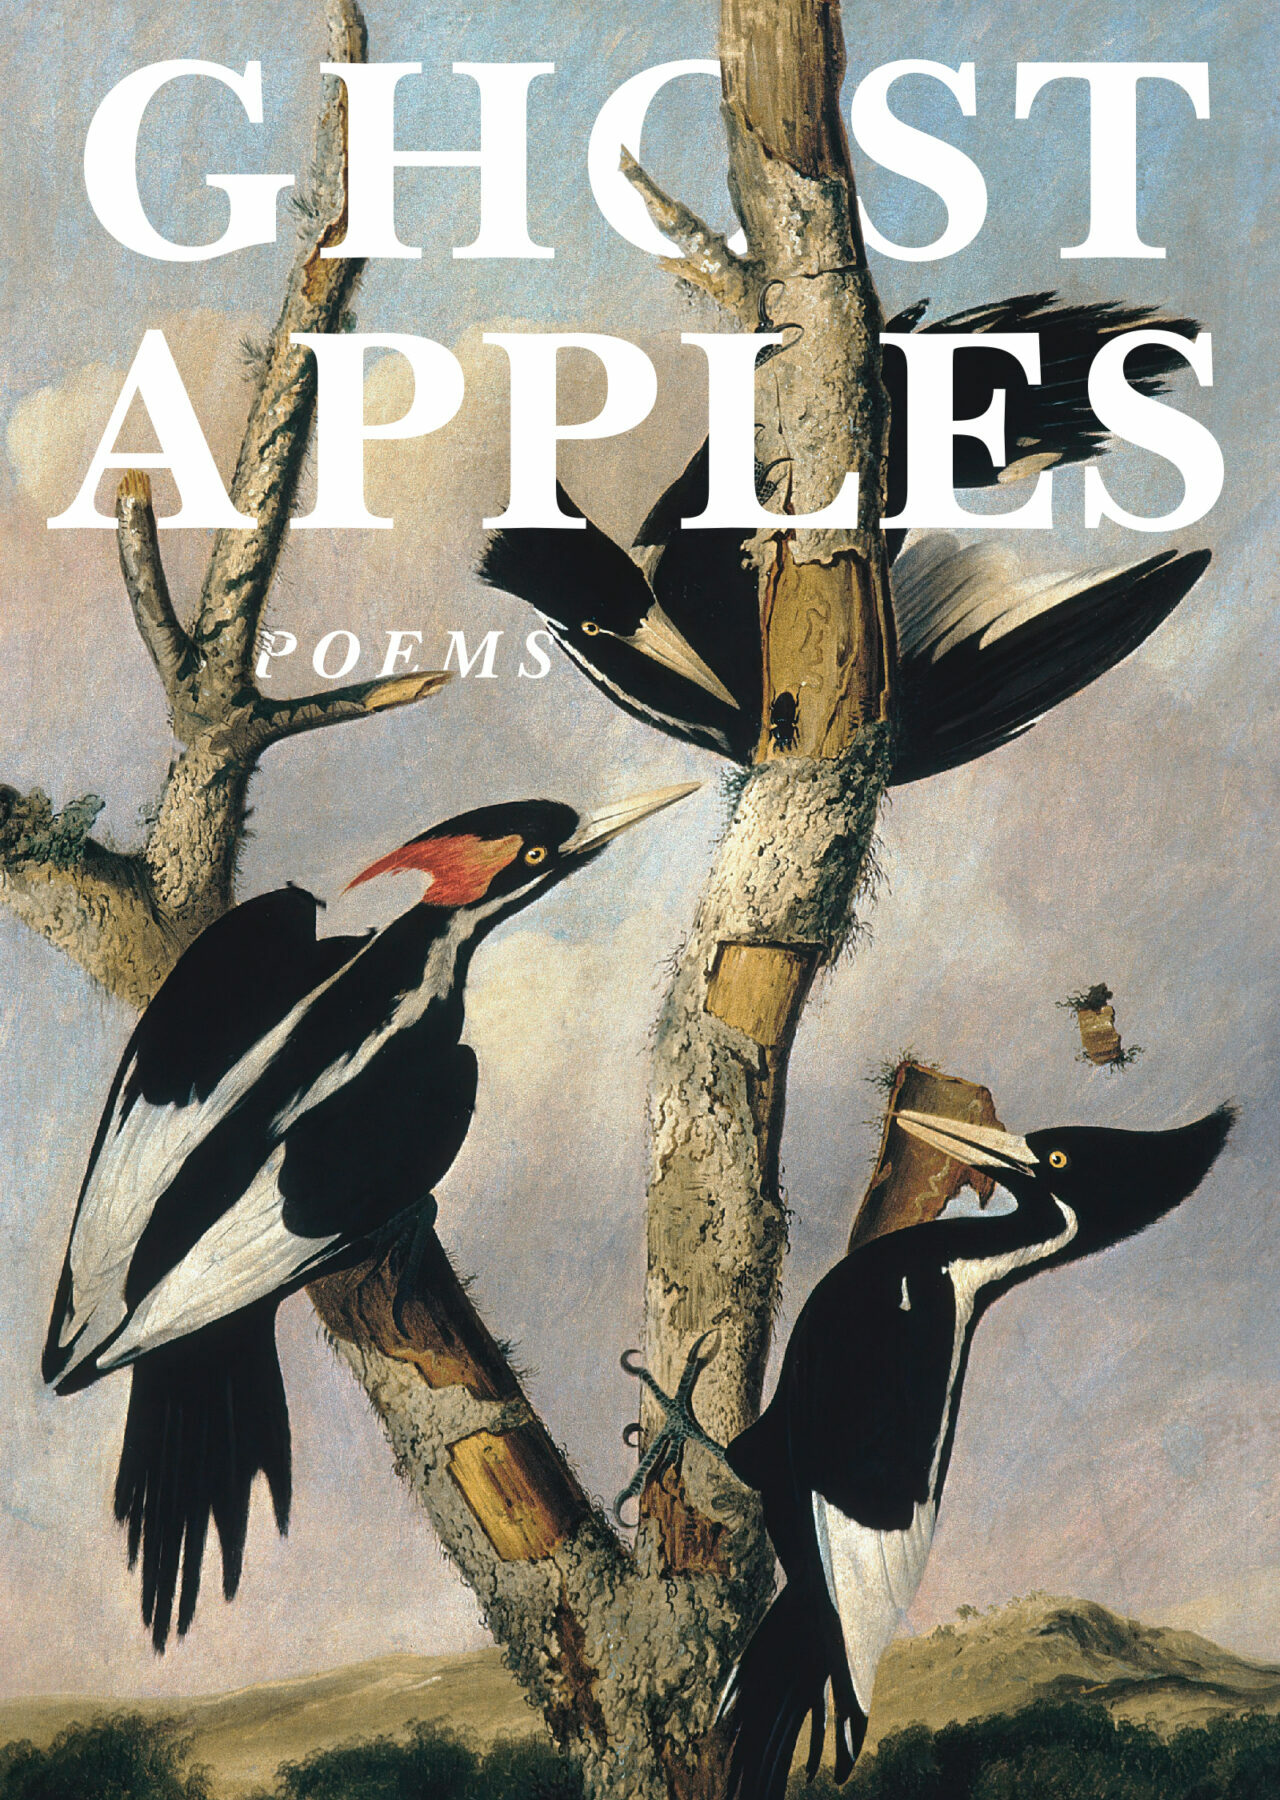 A book cover featuring black and white birds in a bare tree. The title is in white block letters at the top